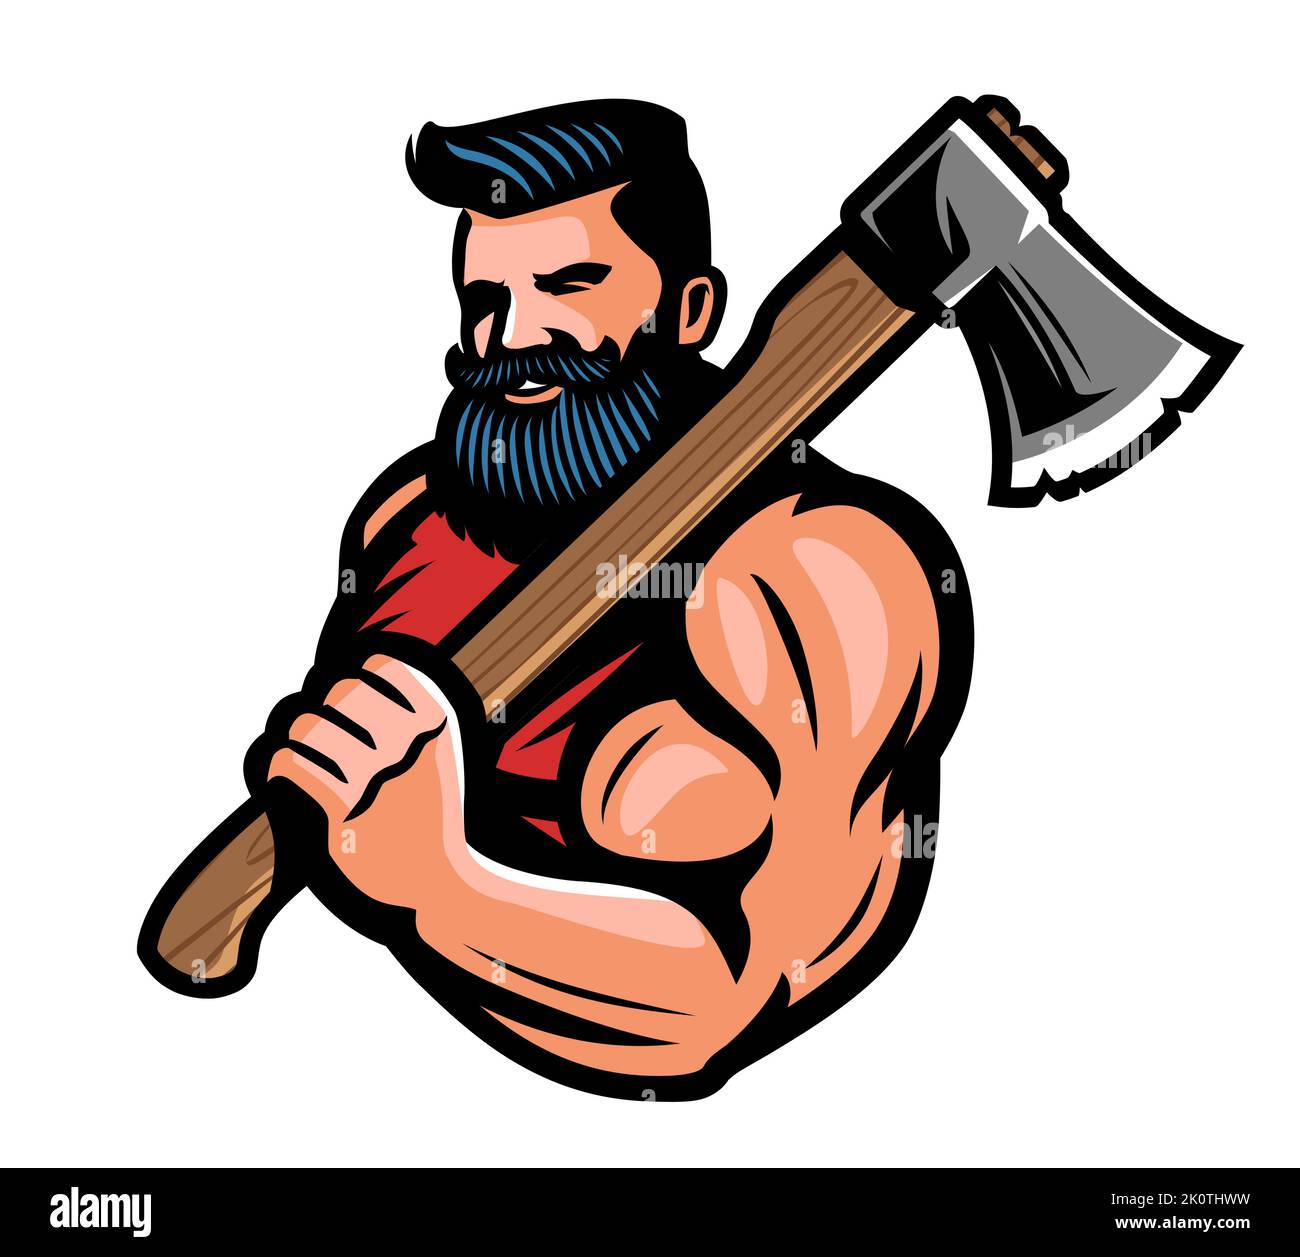 Muscular bearded lumberjack with big ax in hand. Warrior or viking with battle axe emblem. Mascot vector illustration Stock Vector